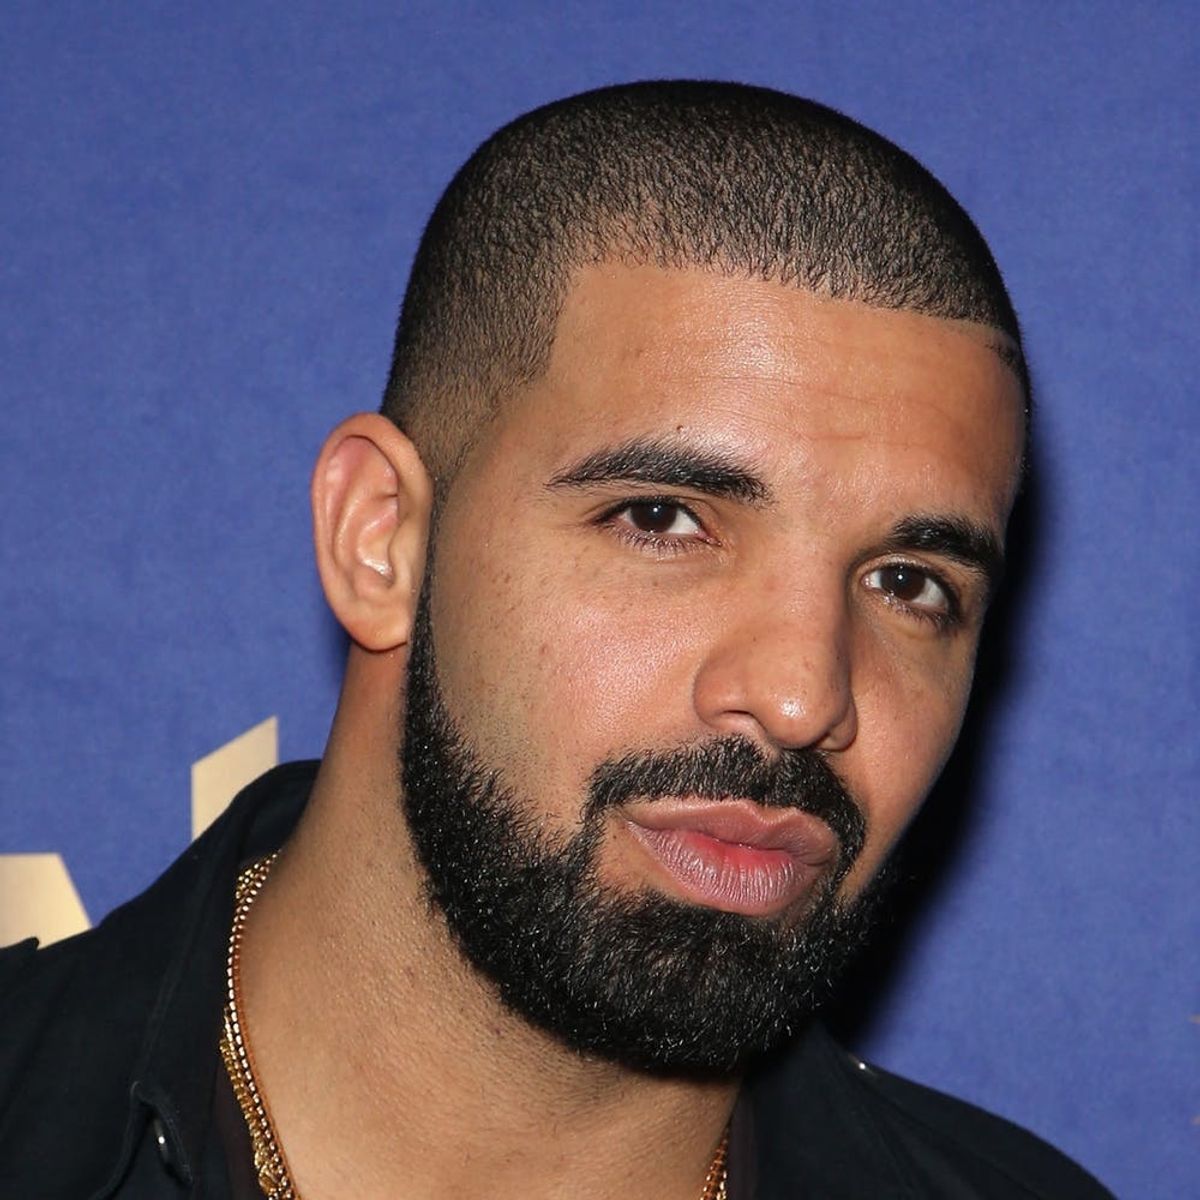 Margaret Atwood Wants Drake for The Handmaid’s Tale Season 2